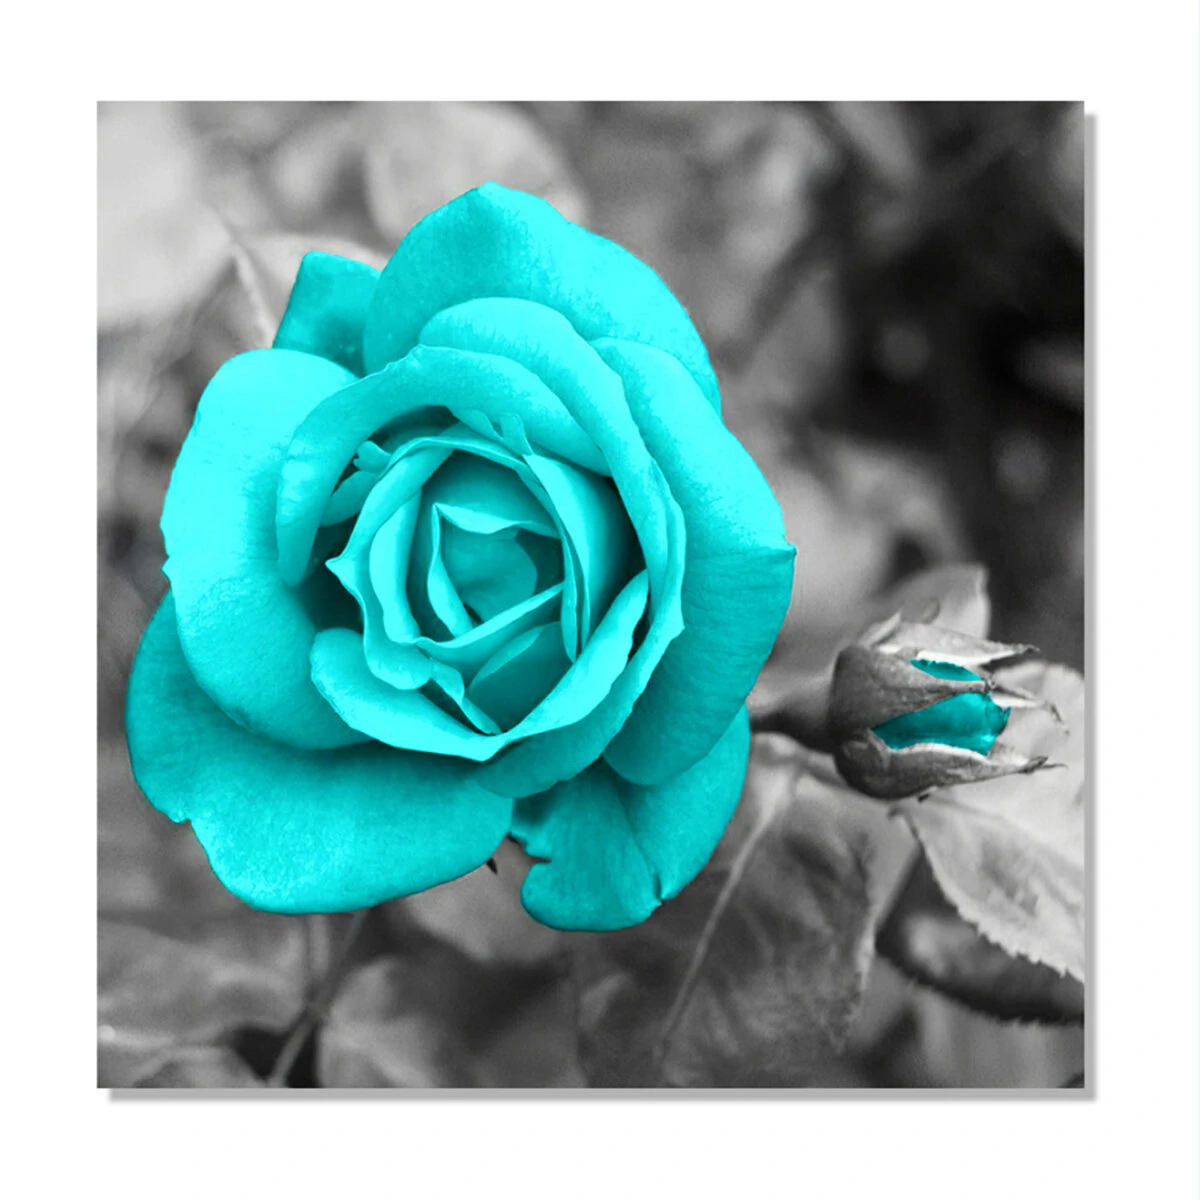 Blue rose canvas painting wall decorative print art pictures unframed wall hanging home office wall decorations